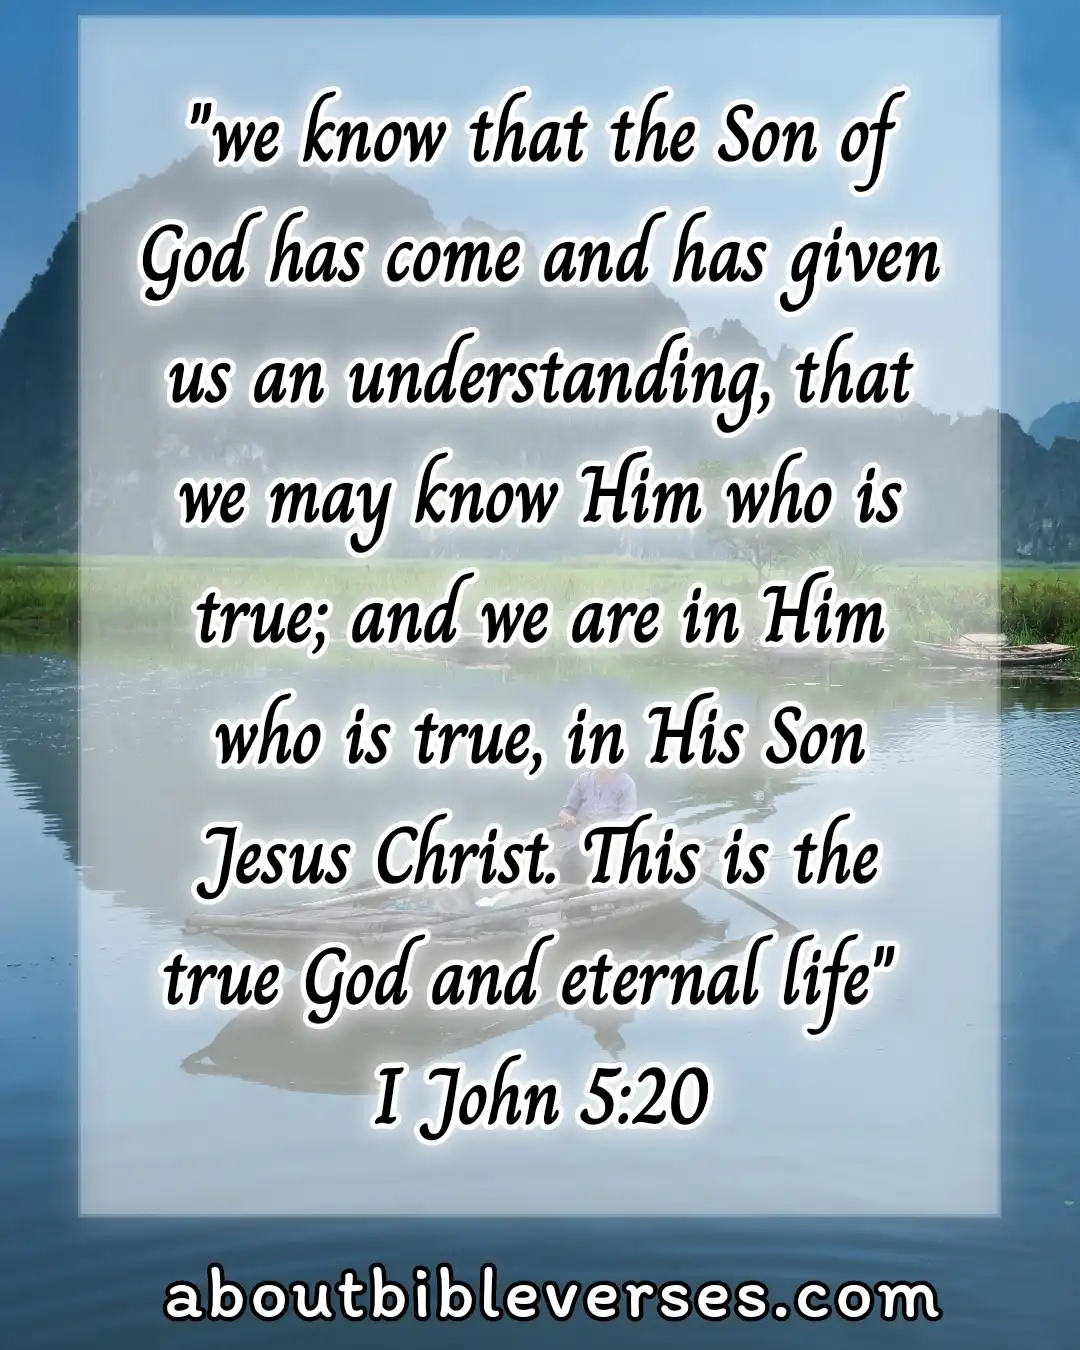 Bible Verses About The Trinity (1 John 5:20)